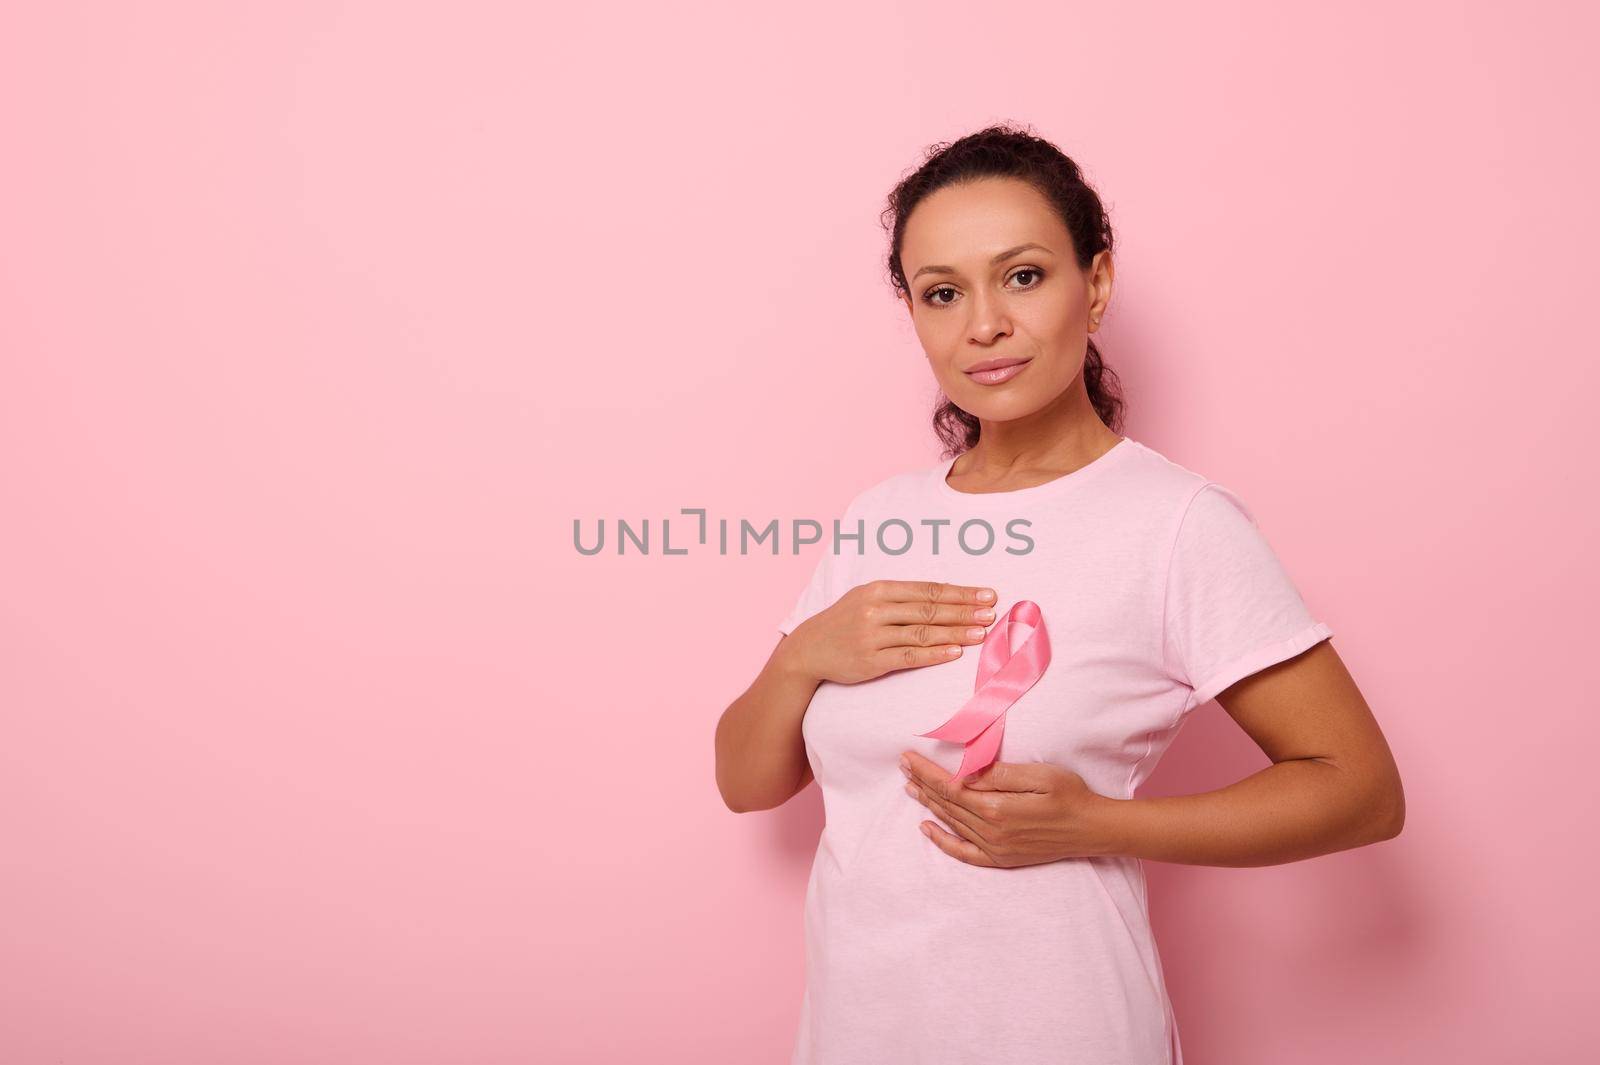 African American woman puts hands around pink ribbon on her pink T Shirt, for breast cancer campaign, supporting Breast Cancer Awareness. Concept of 1 st October Pink Month and women's health care by artgf